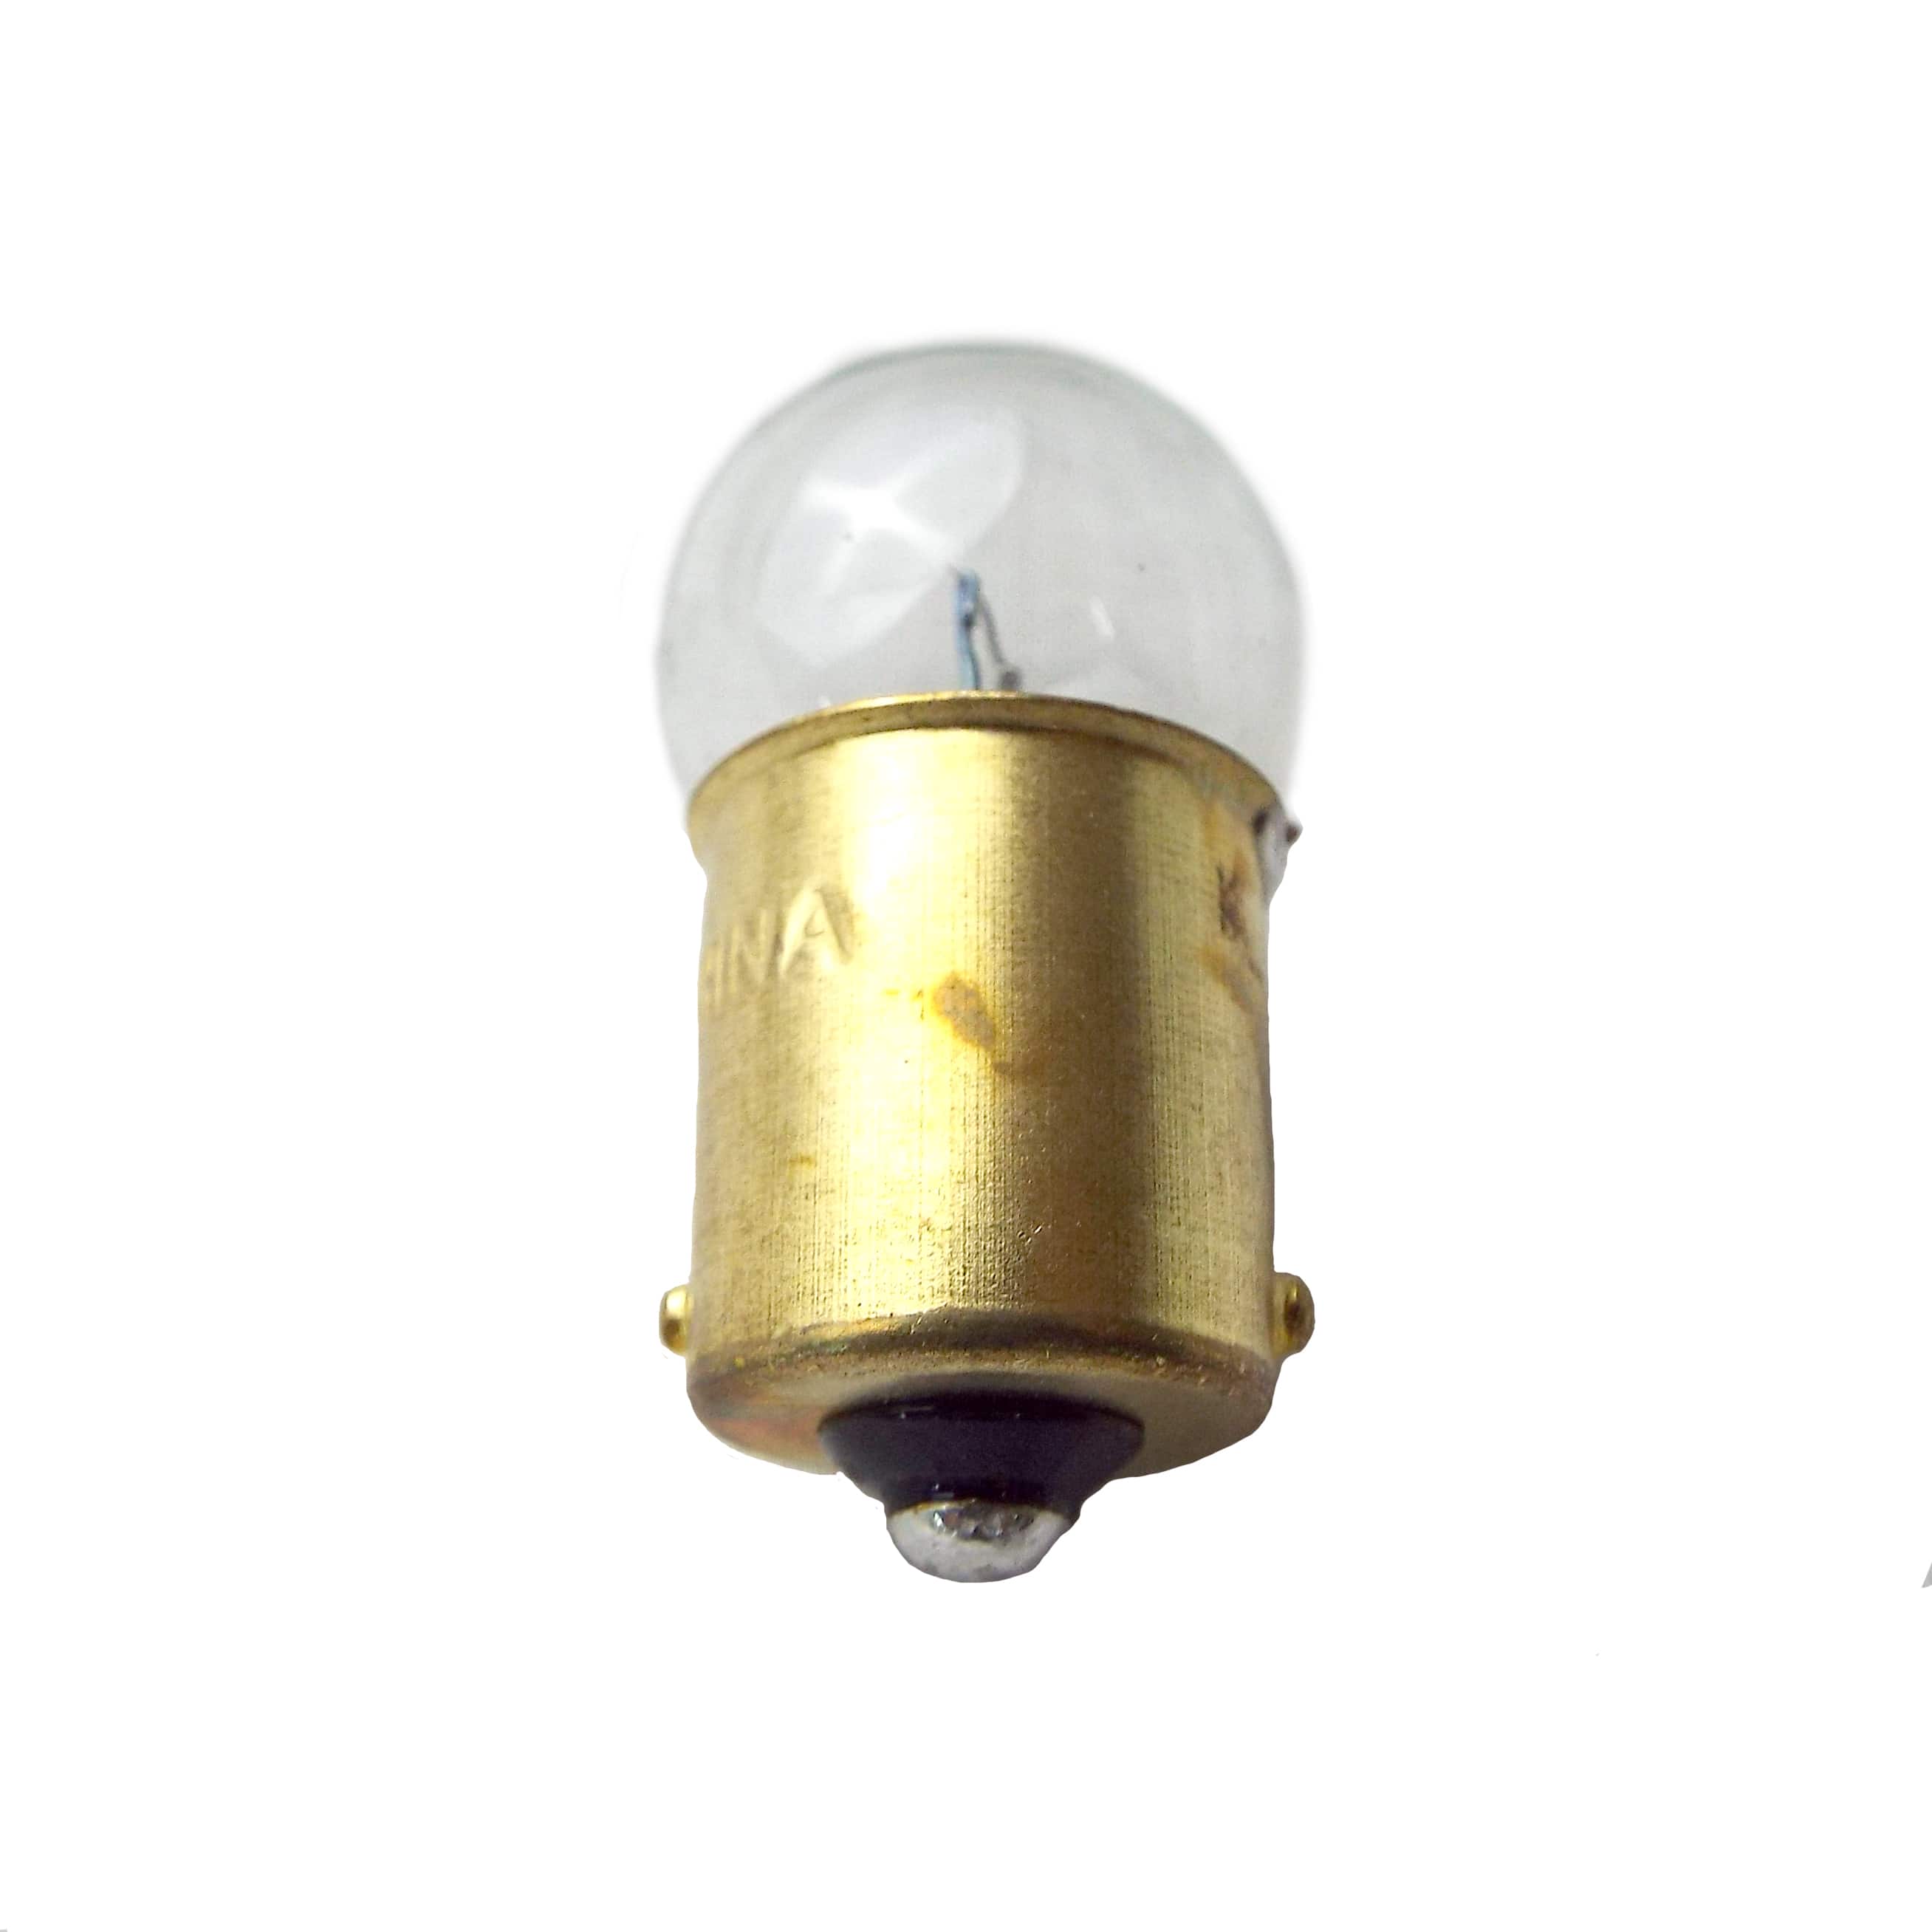 1947-1953 Ligh Blub Dome 6 Volt 15 Candle Power for Lights with Glass Lens Chevrolet and GMC Pickup Truck